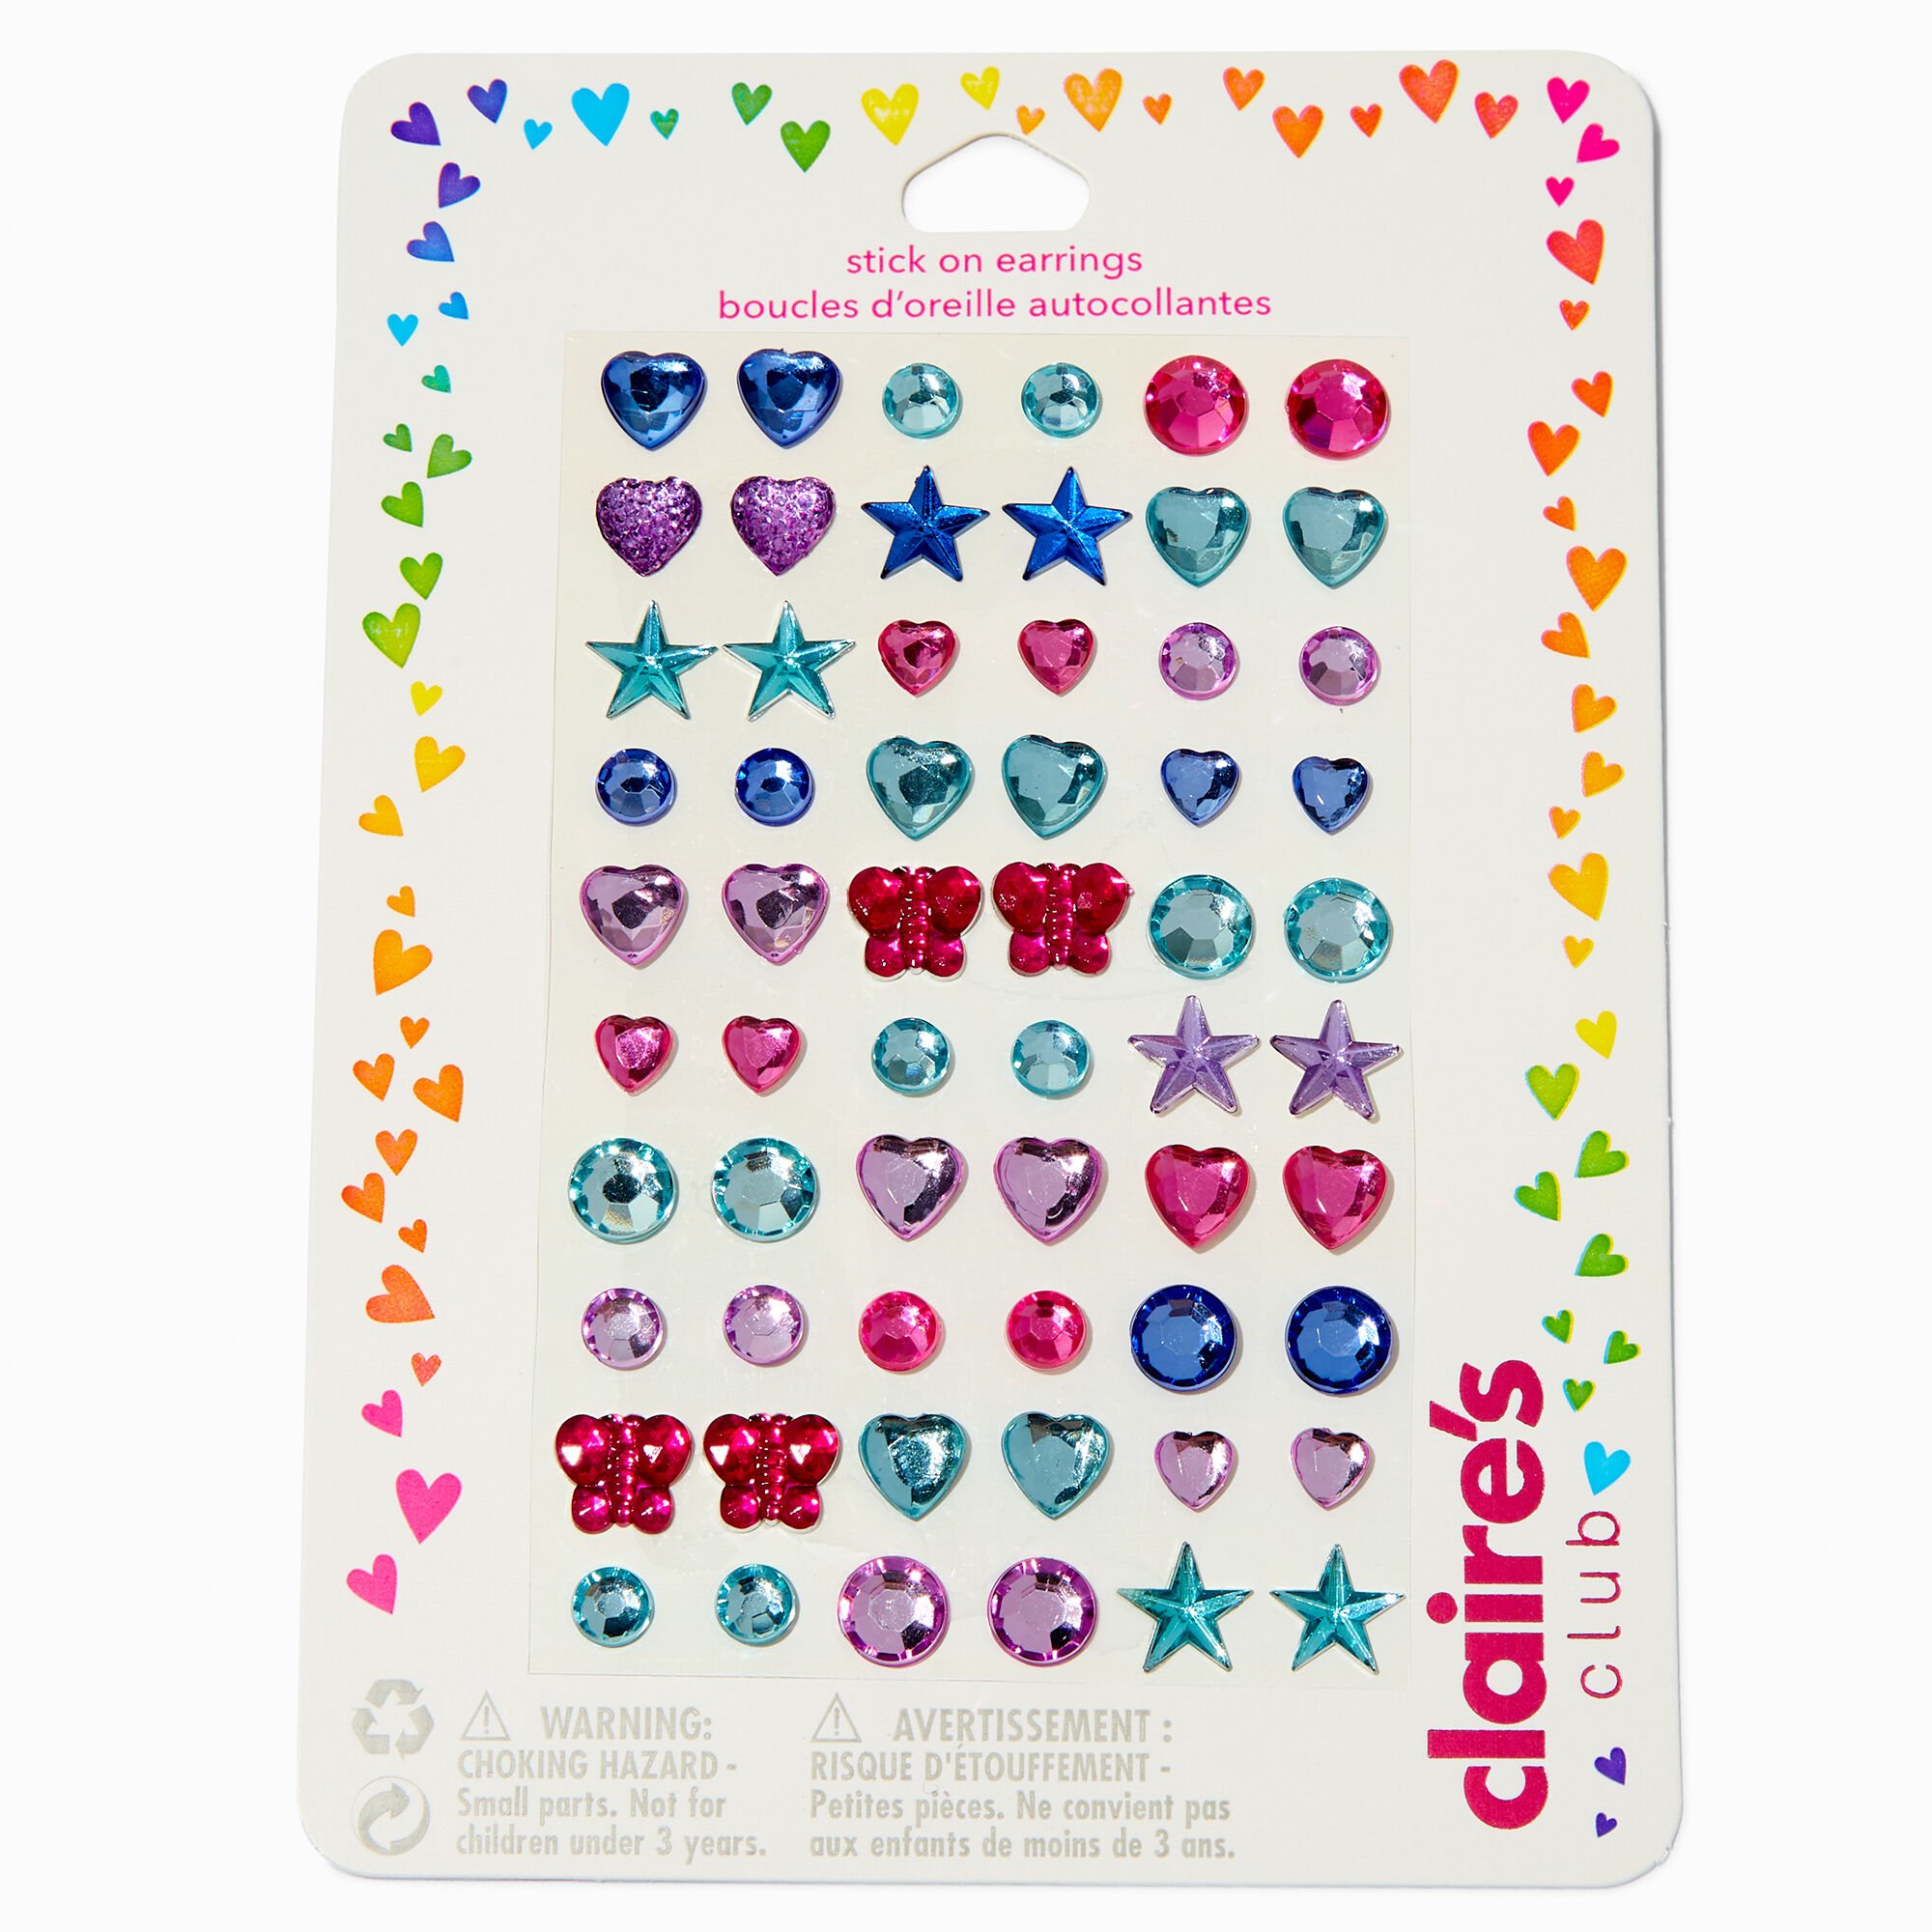 View Claires Club Jewel Tone Stick On Earrings 30 Pack information